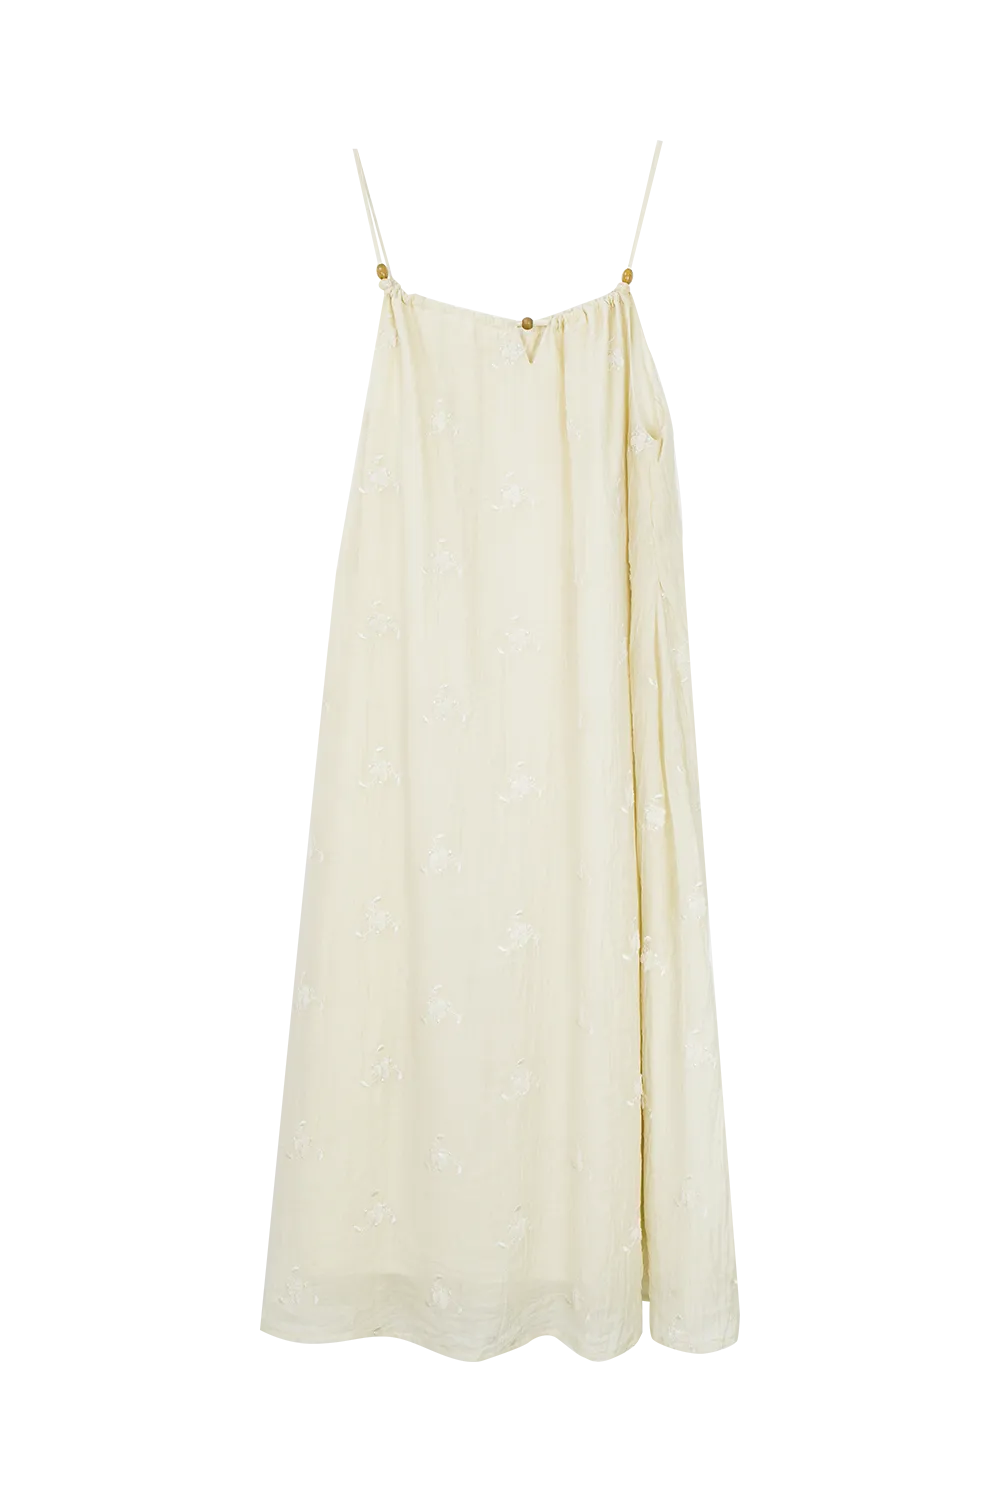 Floral Embellished Maxi Dress with Spaghetti Straps - Elegant Evening Wear